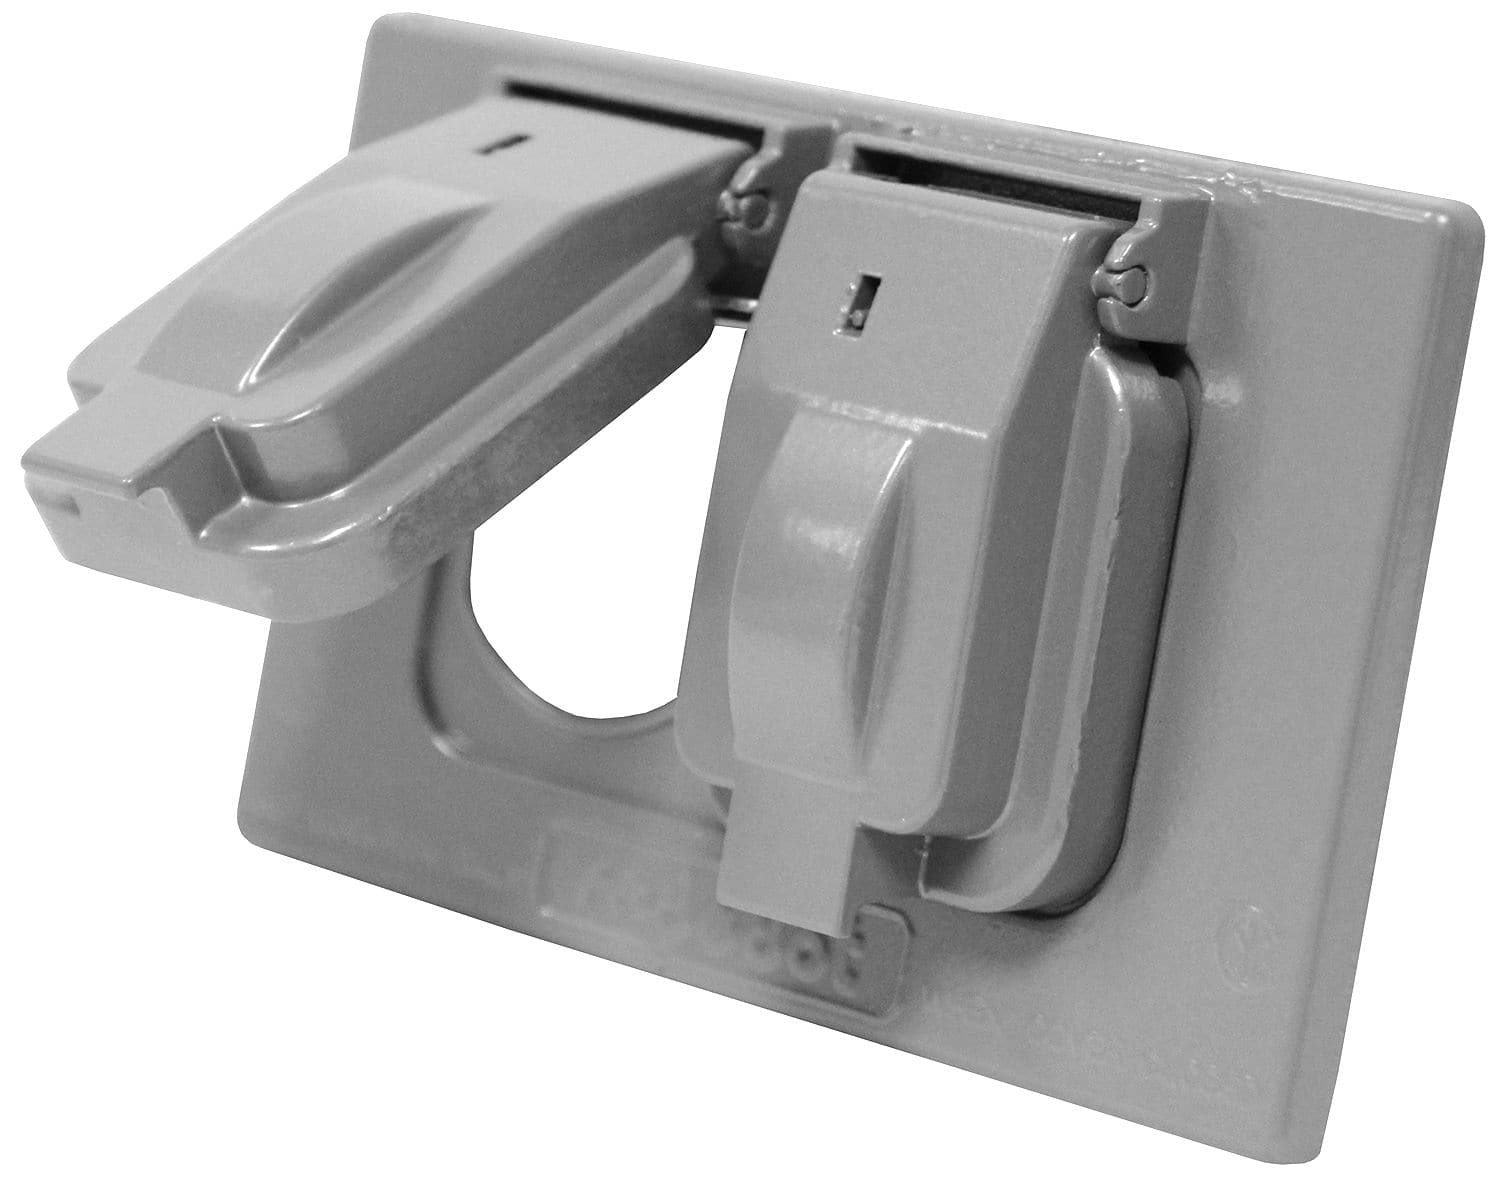 Thomas & Betts 37127-722 Horizontal Duplex Outdoor Outlet Cover, Includes  Gasket and Screws, Grey